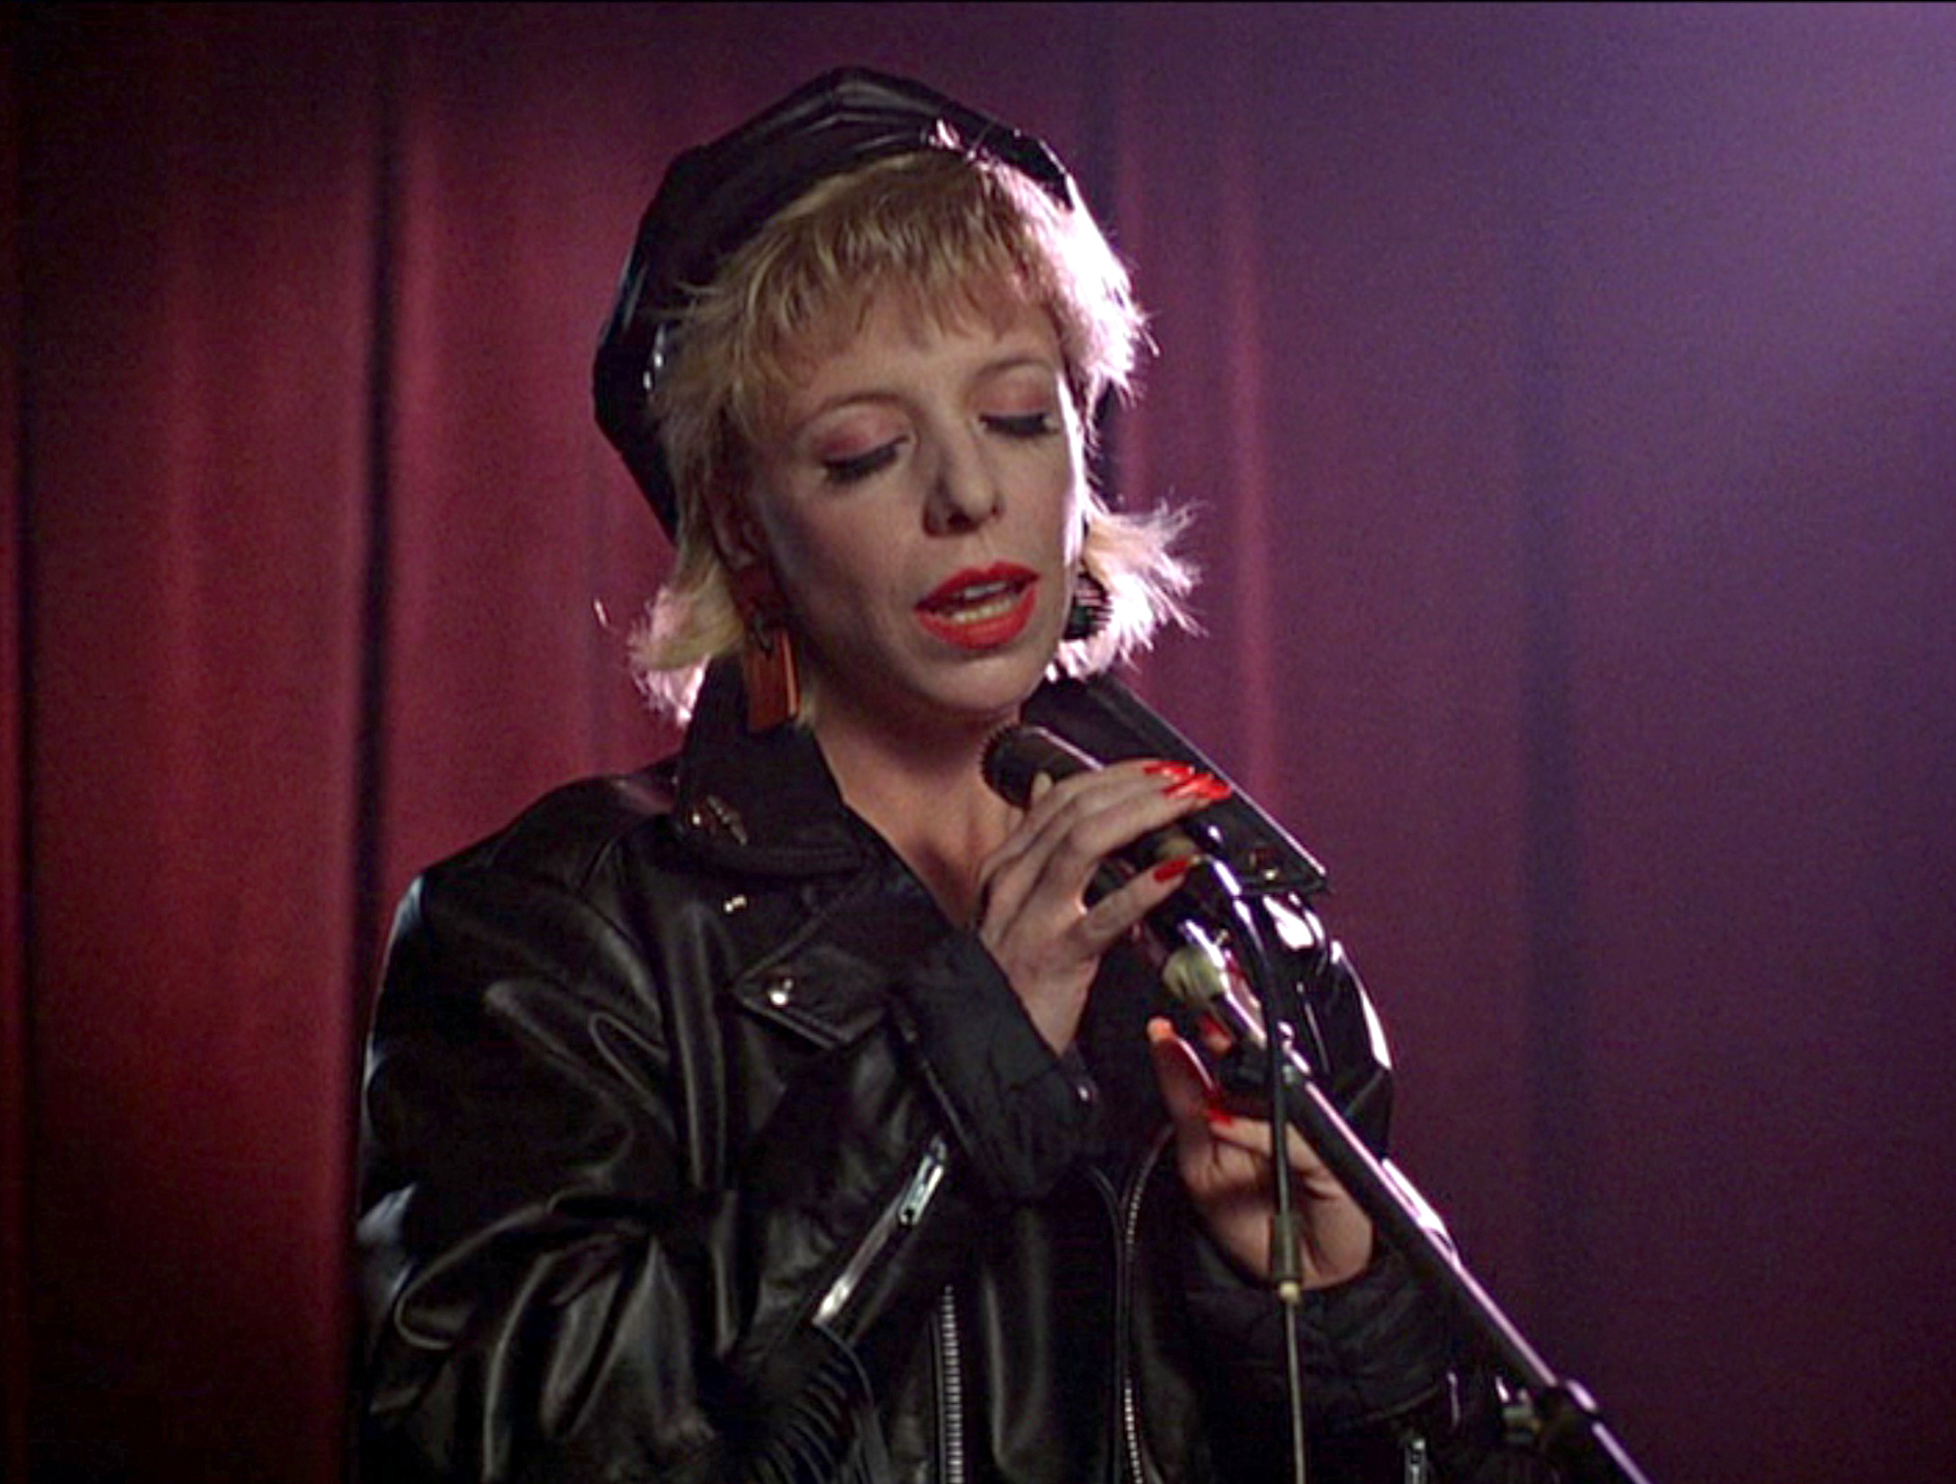 close-up image of singer/actress Julee Cruise in the 1990 pilot episode of "Twin Peaks." She has her eyes closed as she emotionally sings into a microphone while appearing as a road house singer in the episode</b>